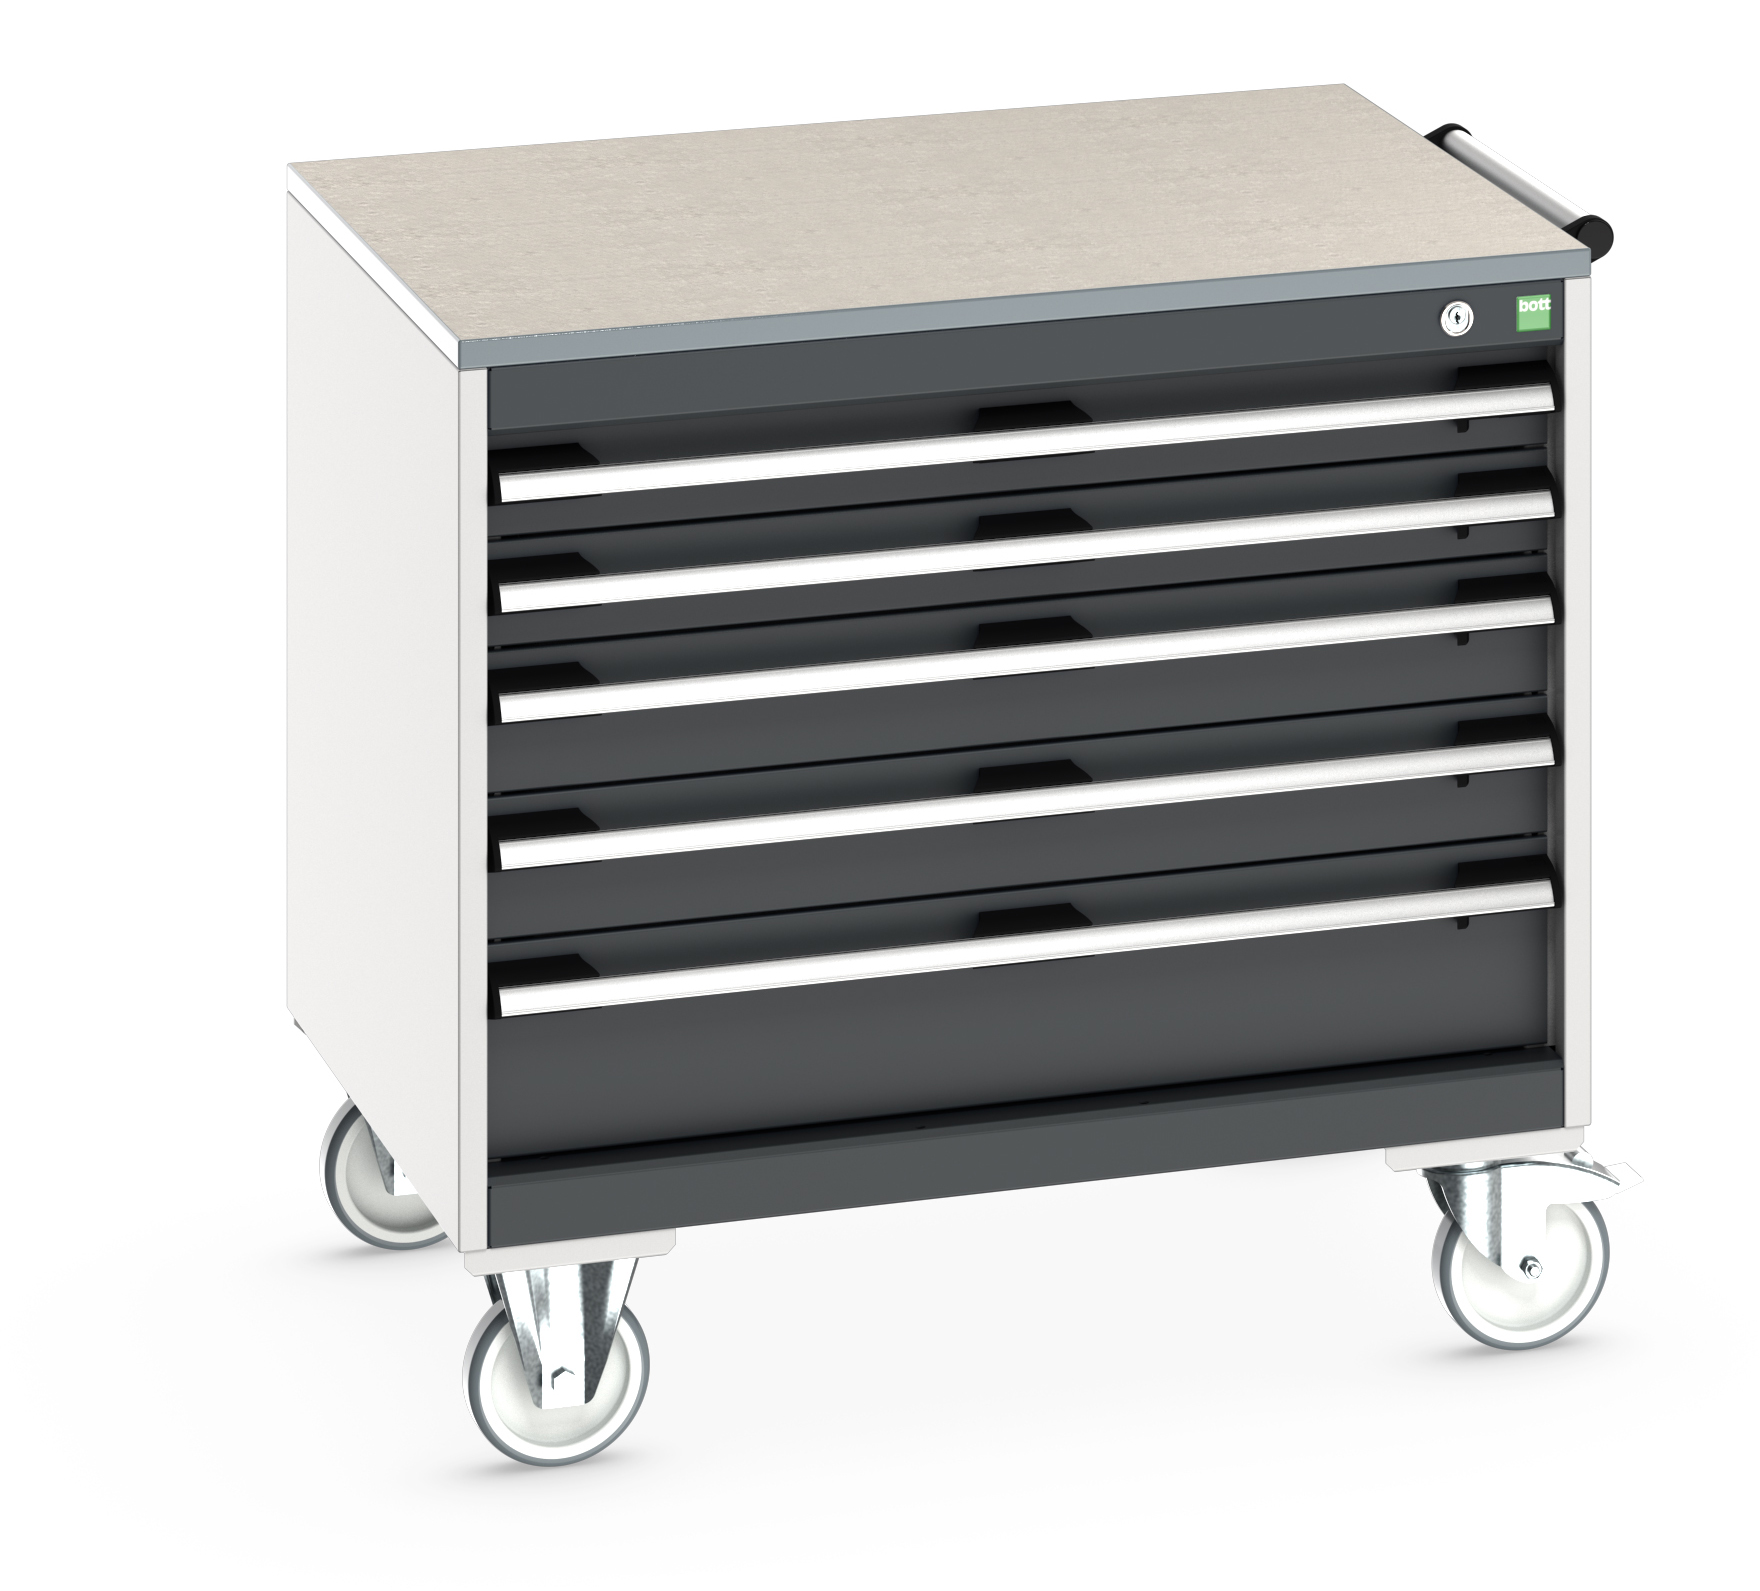 Bott Cubio Mobile Drawer Cabinet With 5 Drawers & Lino Worktop - 40402154.19V